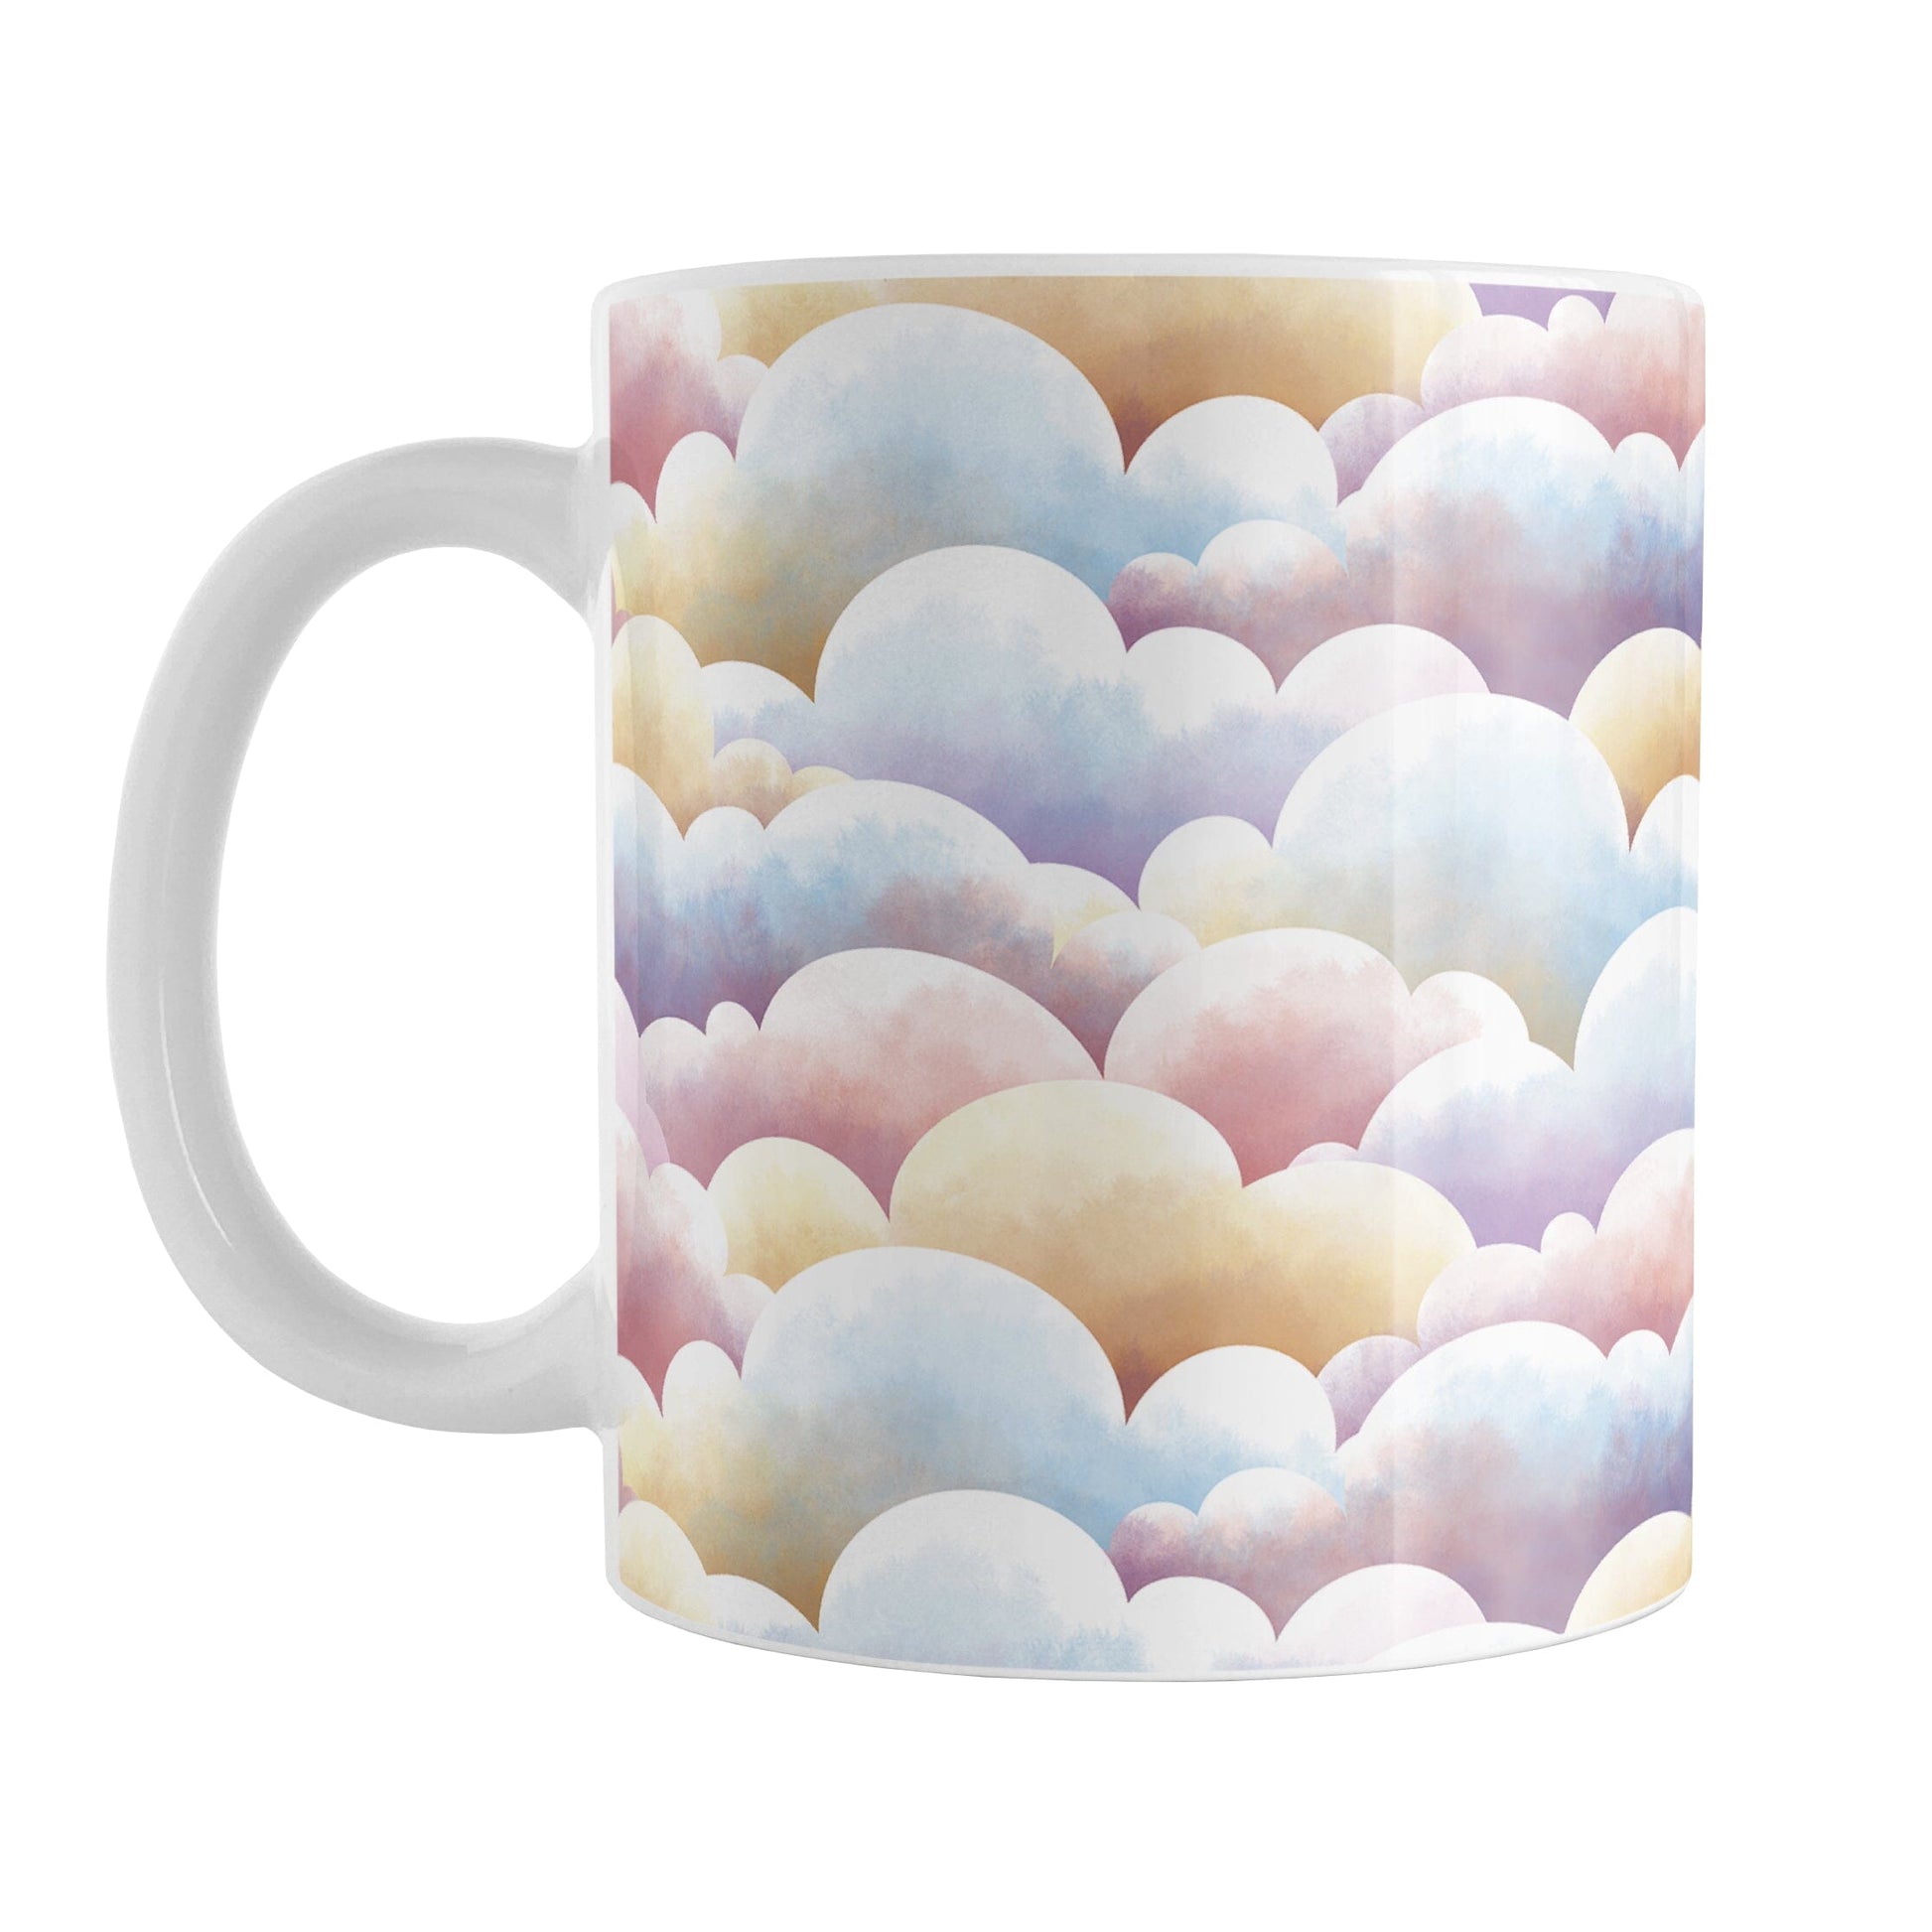 Colorful Clouds Mug (11oz) at Amy's Coffee Mugs. A ceramic coffee mug designed with whimsical and colorful clouds in a pattern that wraps around the mug to the handle.